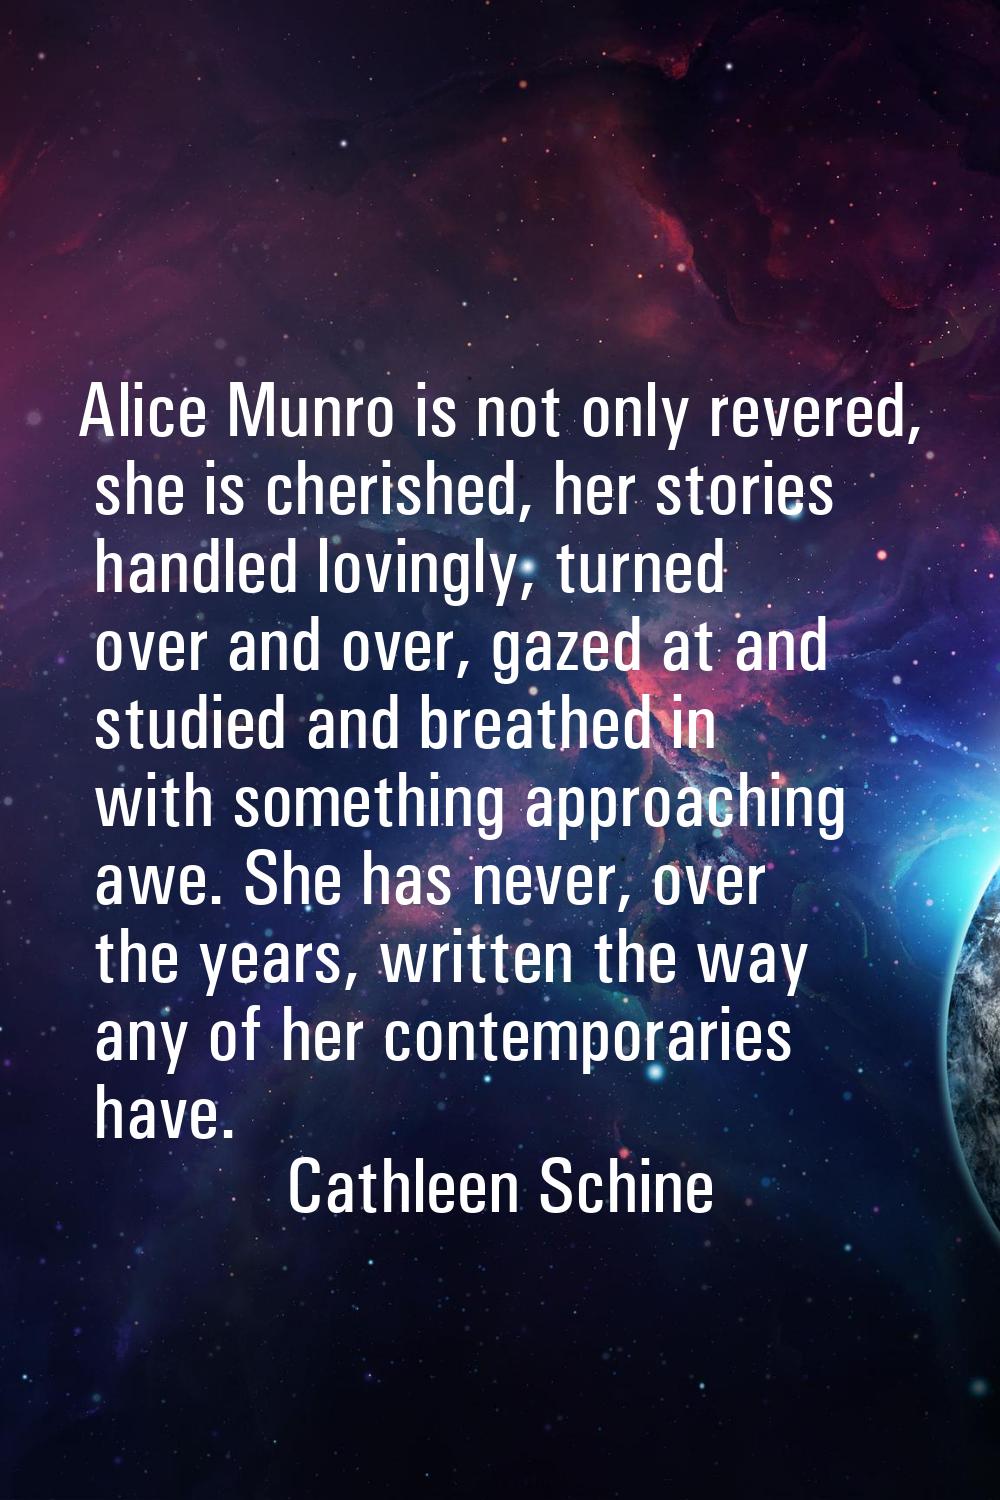 Alice Munro is not only revered, she is cherished, her stories handled lovingly, turned over and ov